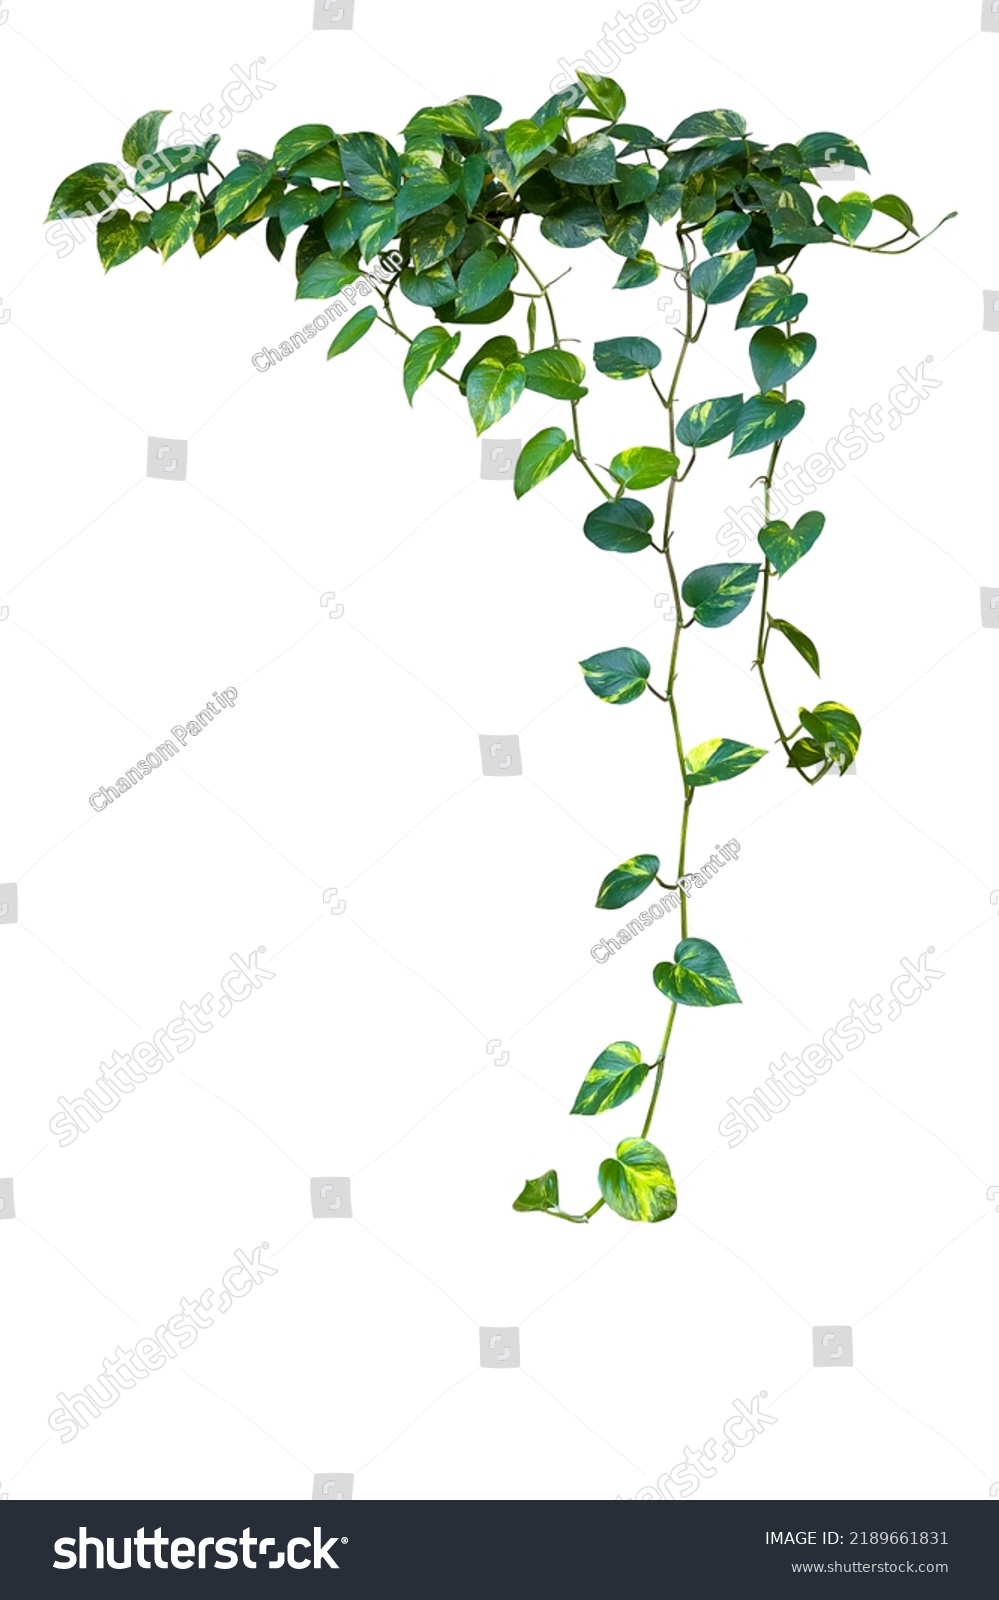 Heart shaped green variegated leave hanging vine plant bush of devil’s ivy or golden pothos (Epipremnum aureum) popular foliage tropical houseplant isolated on white with clipping path. #2189661831